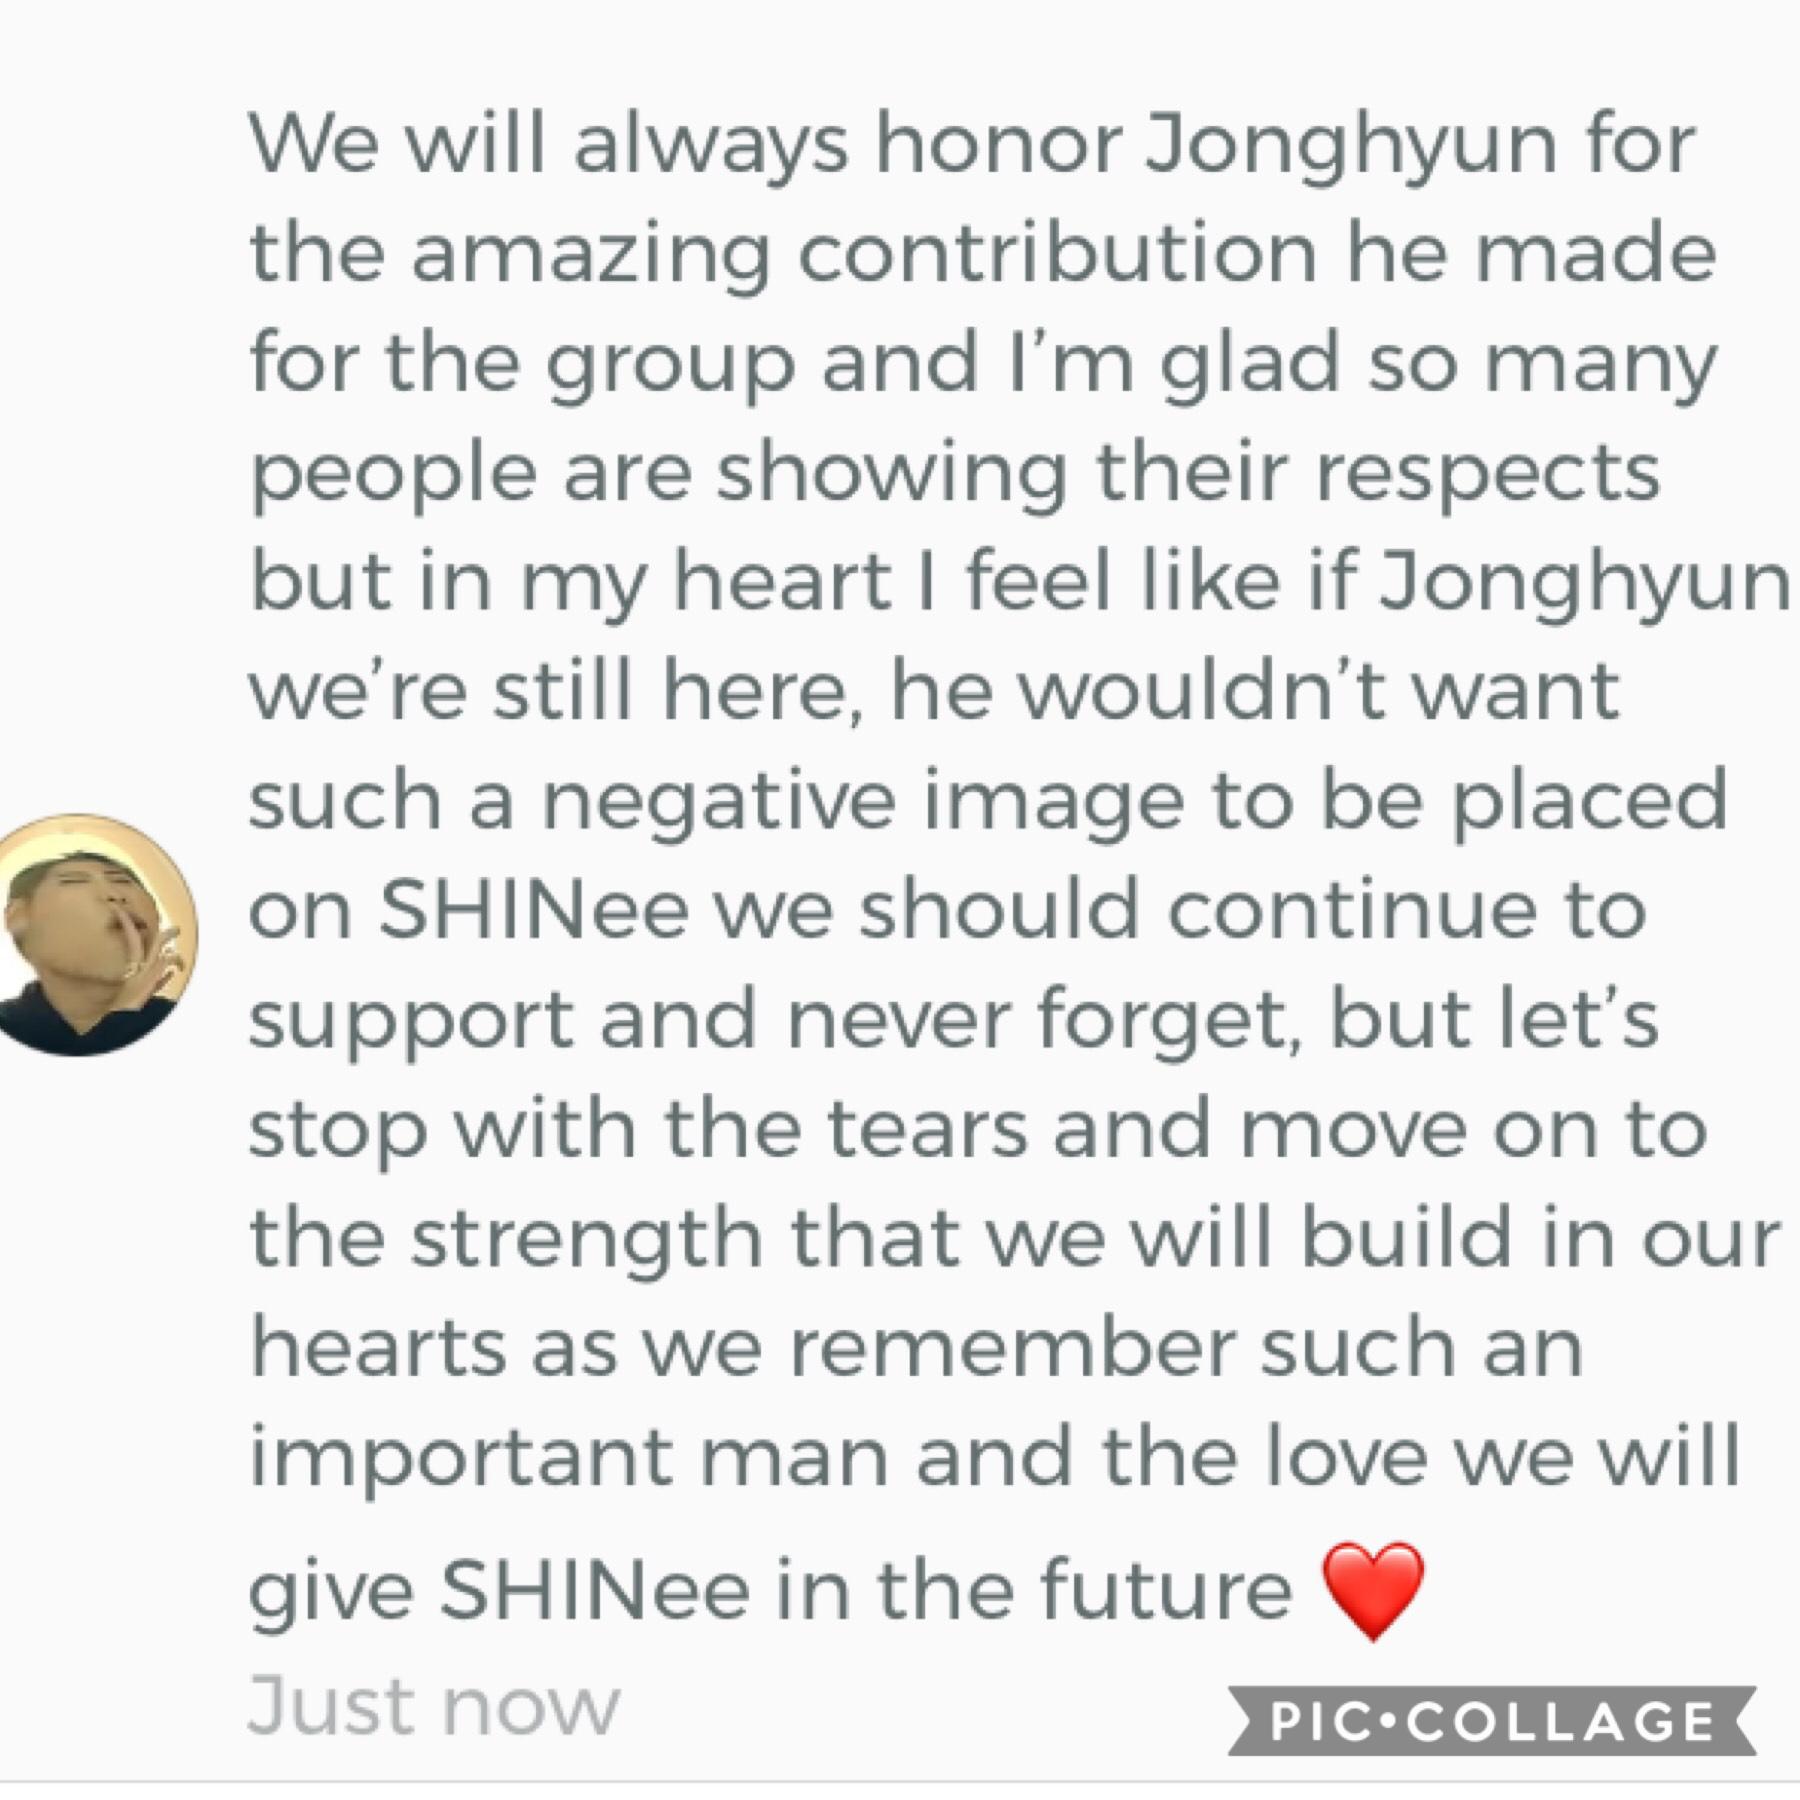 So Ive been meaning to say something like this for a while now and I just commented it on someone’s page and I thought I should post it. I want us all to stay strong for SHINee. And I mean everything with no disrespect to Jonghyun at all